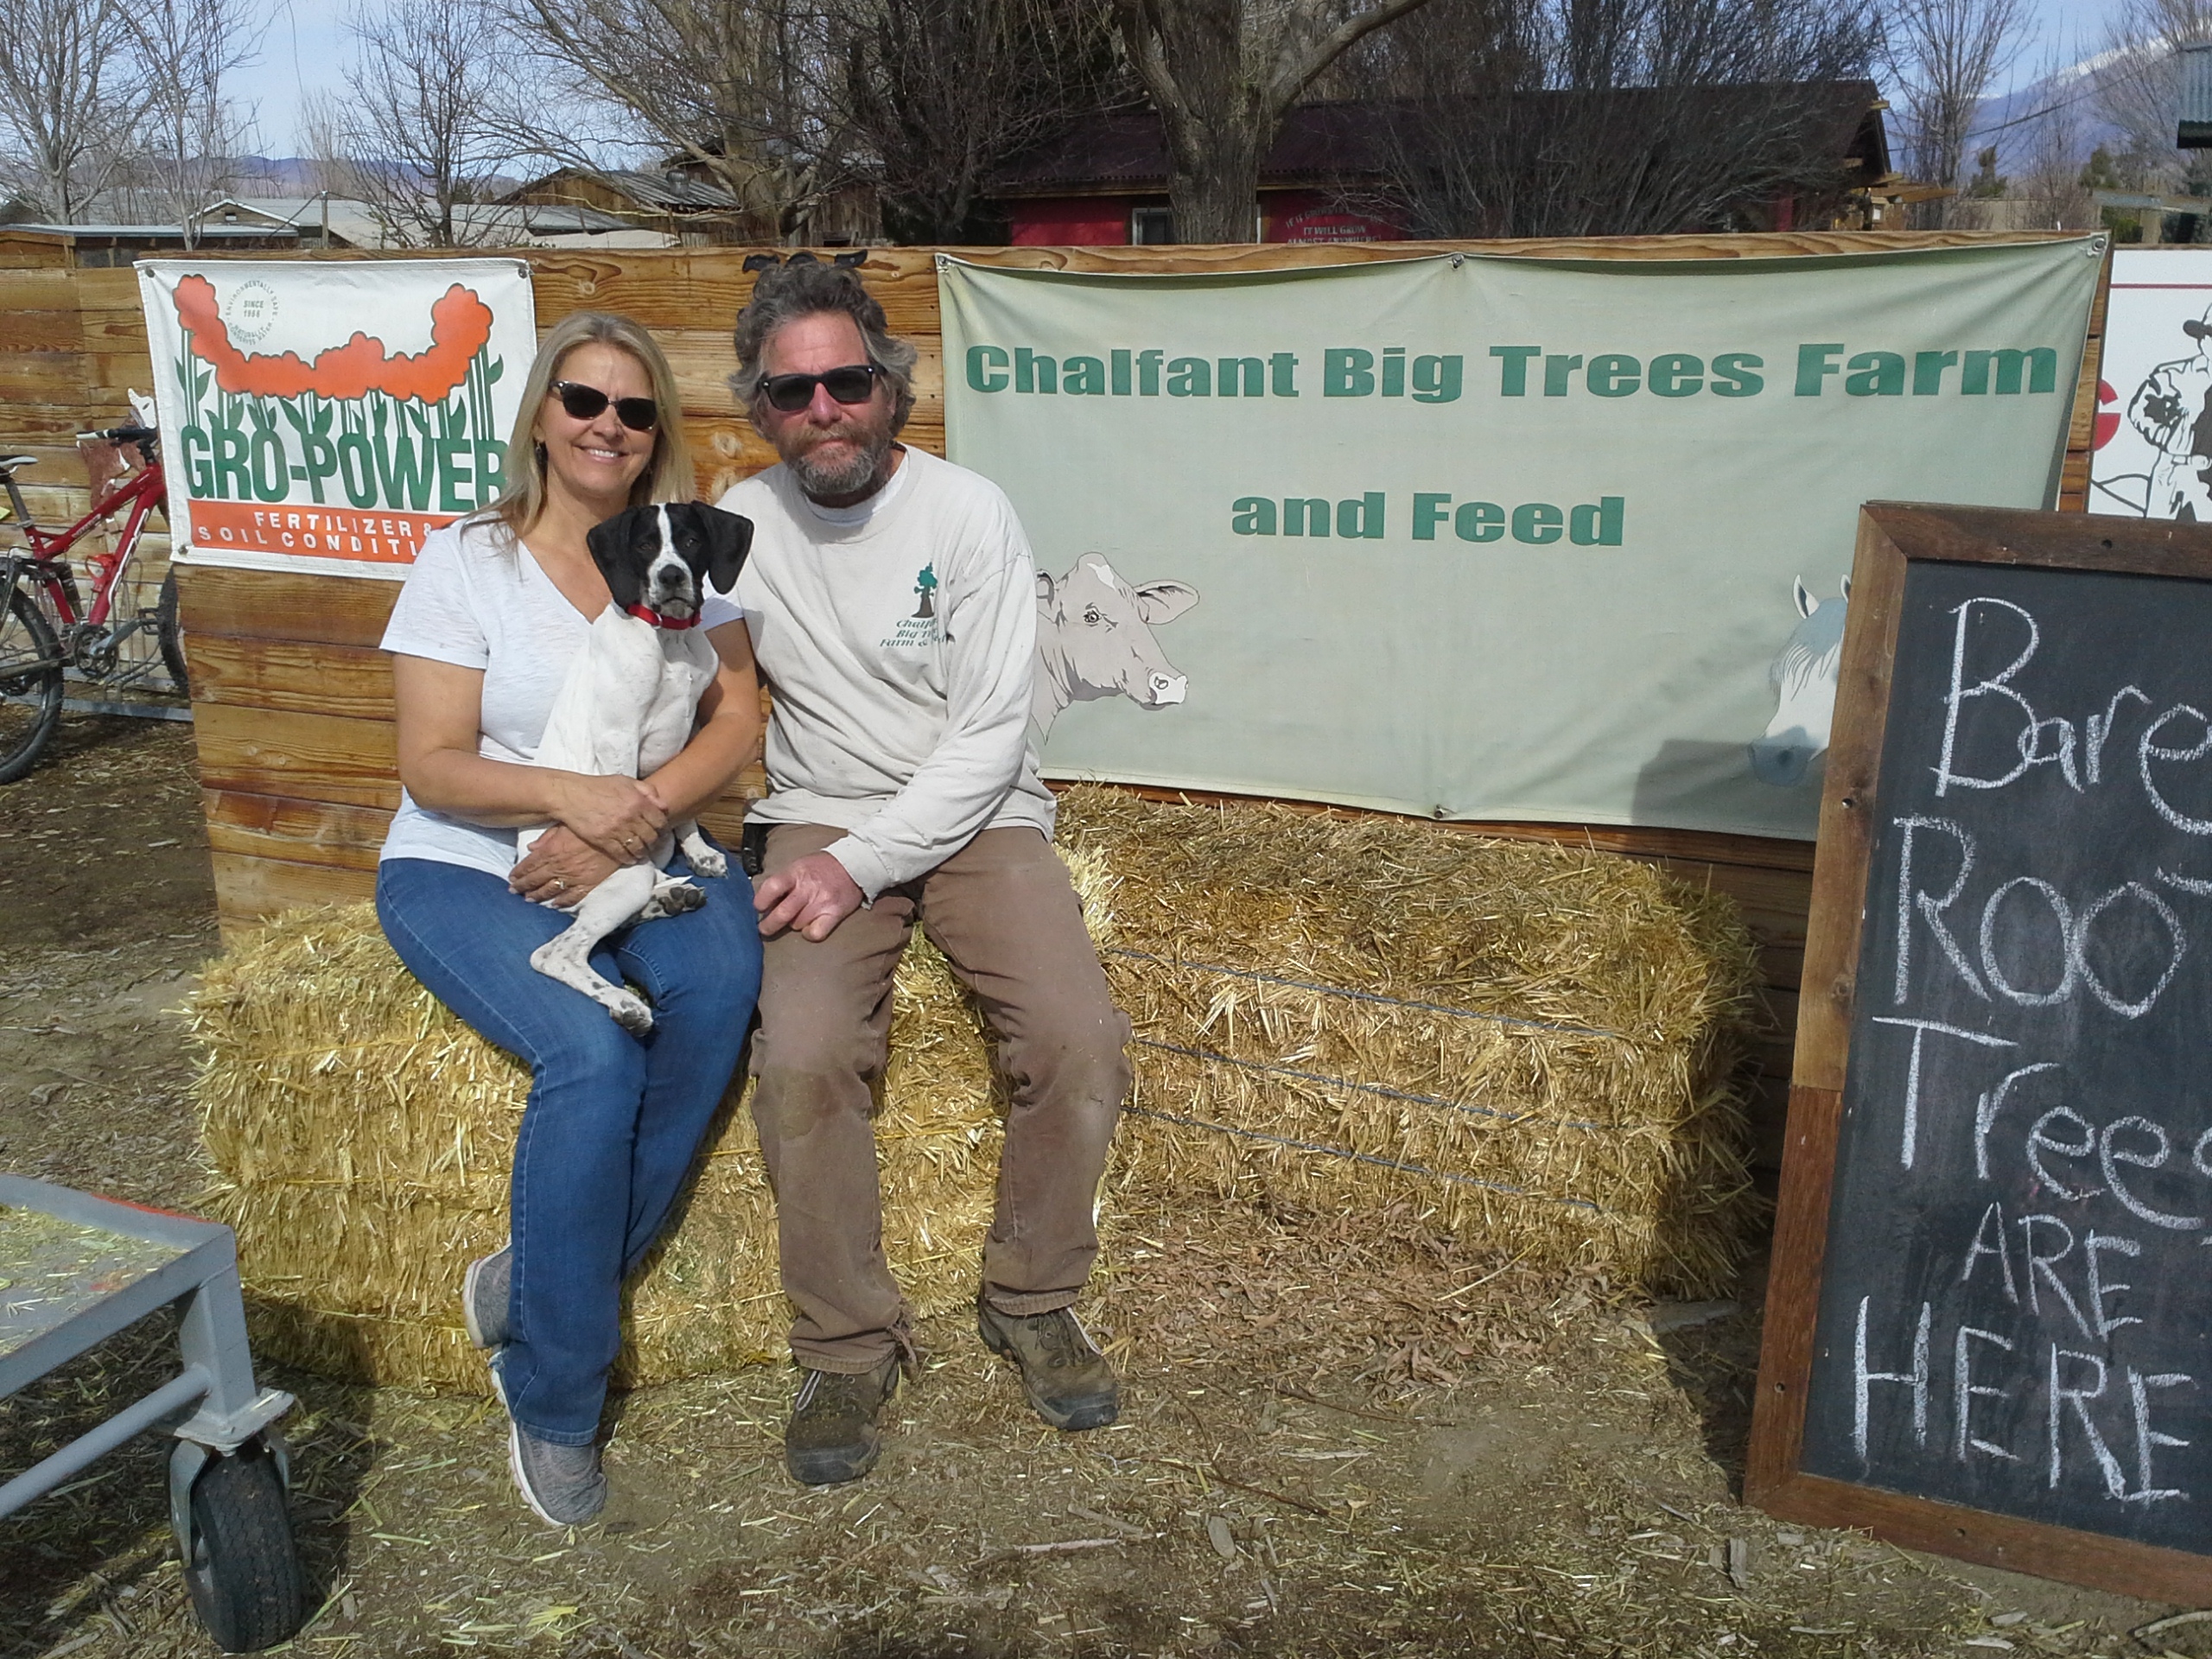 As business sponsors of Eastern Sierra Land Trust, Steve and Debbie Blair of Chalfant Big Trees Farm & Feed are committed to helping protect working and wild landscapes, wildlife habitat, and recreational opportunities in the Eastern Sierra.